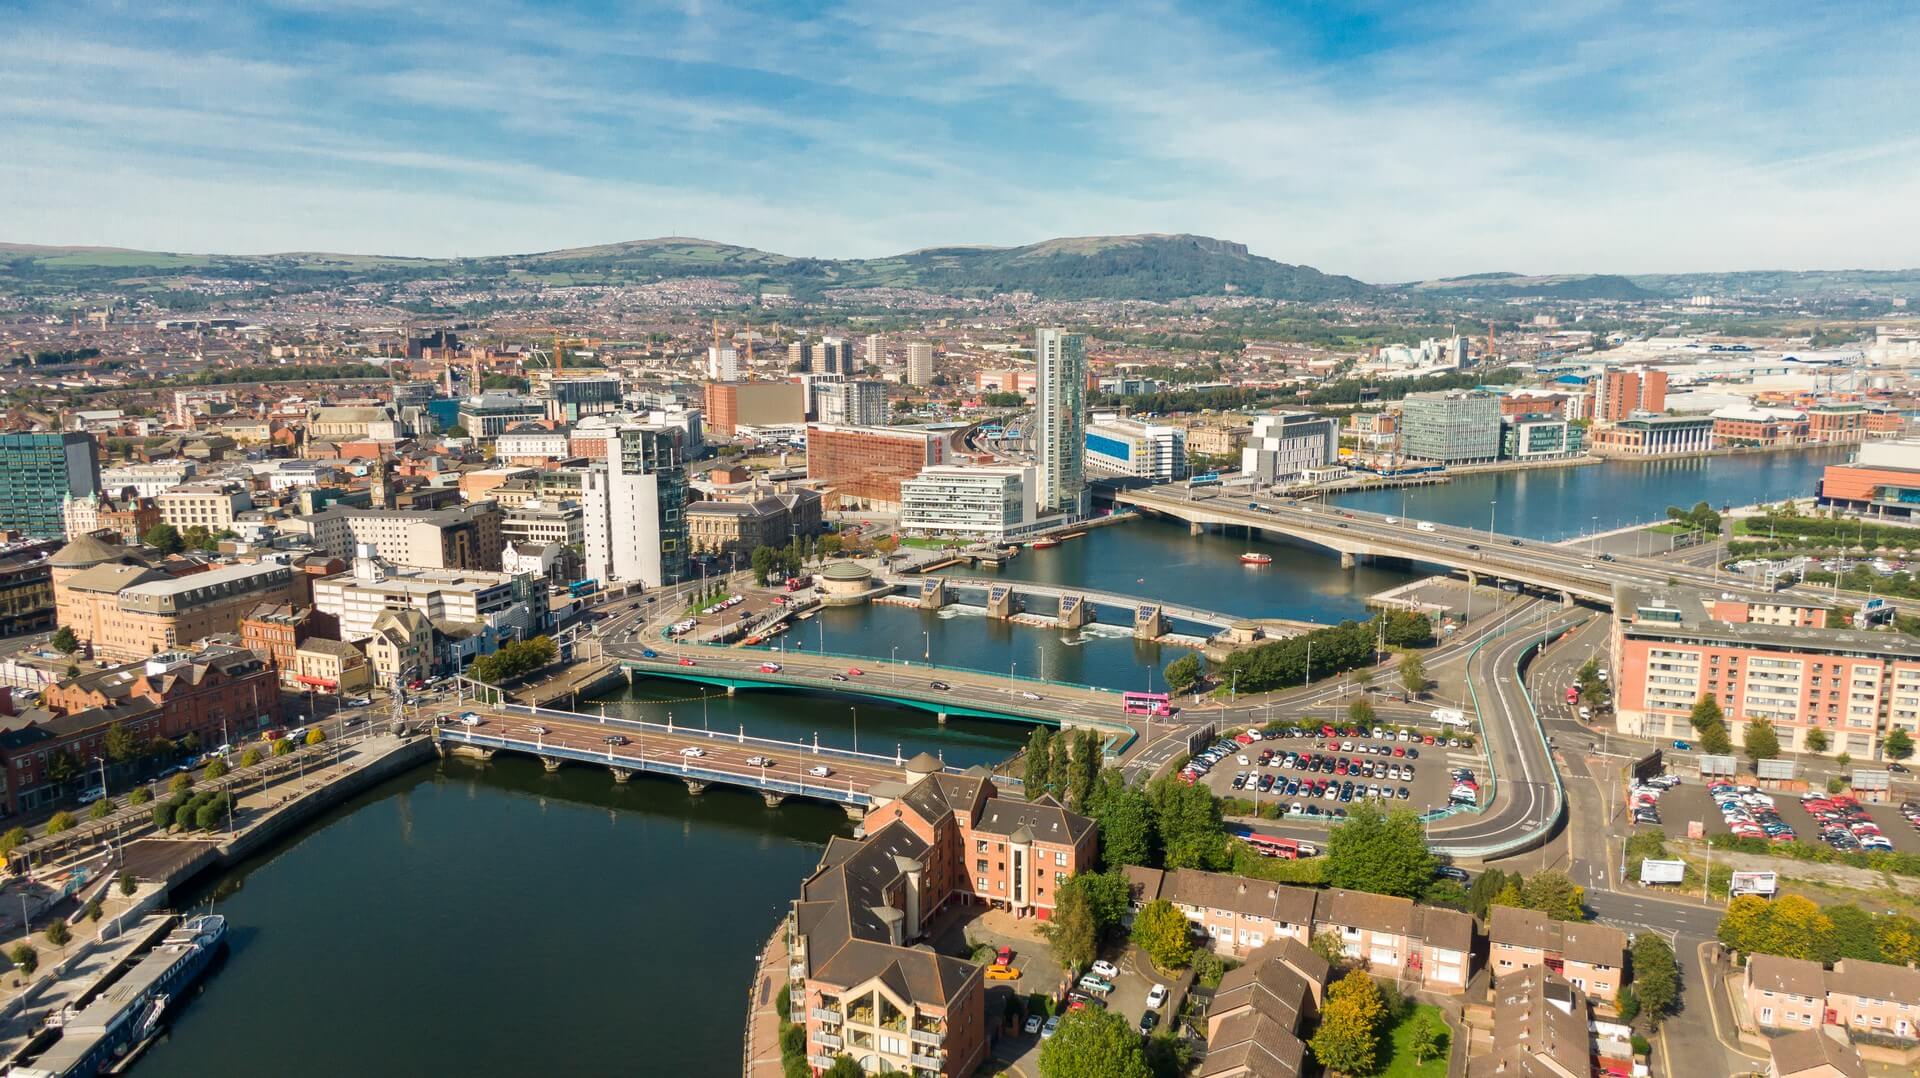 Aerial view on river and buildings in City center of Belfast Northern Ireland. Drone photo, high angle view of town
